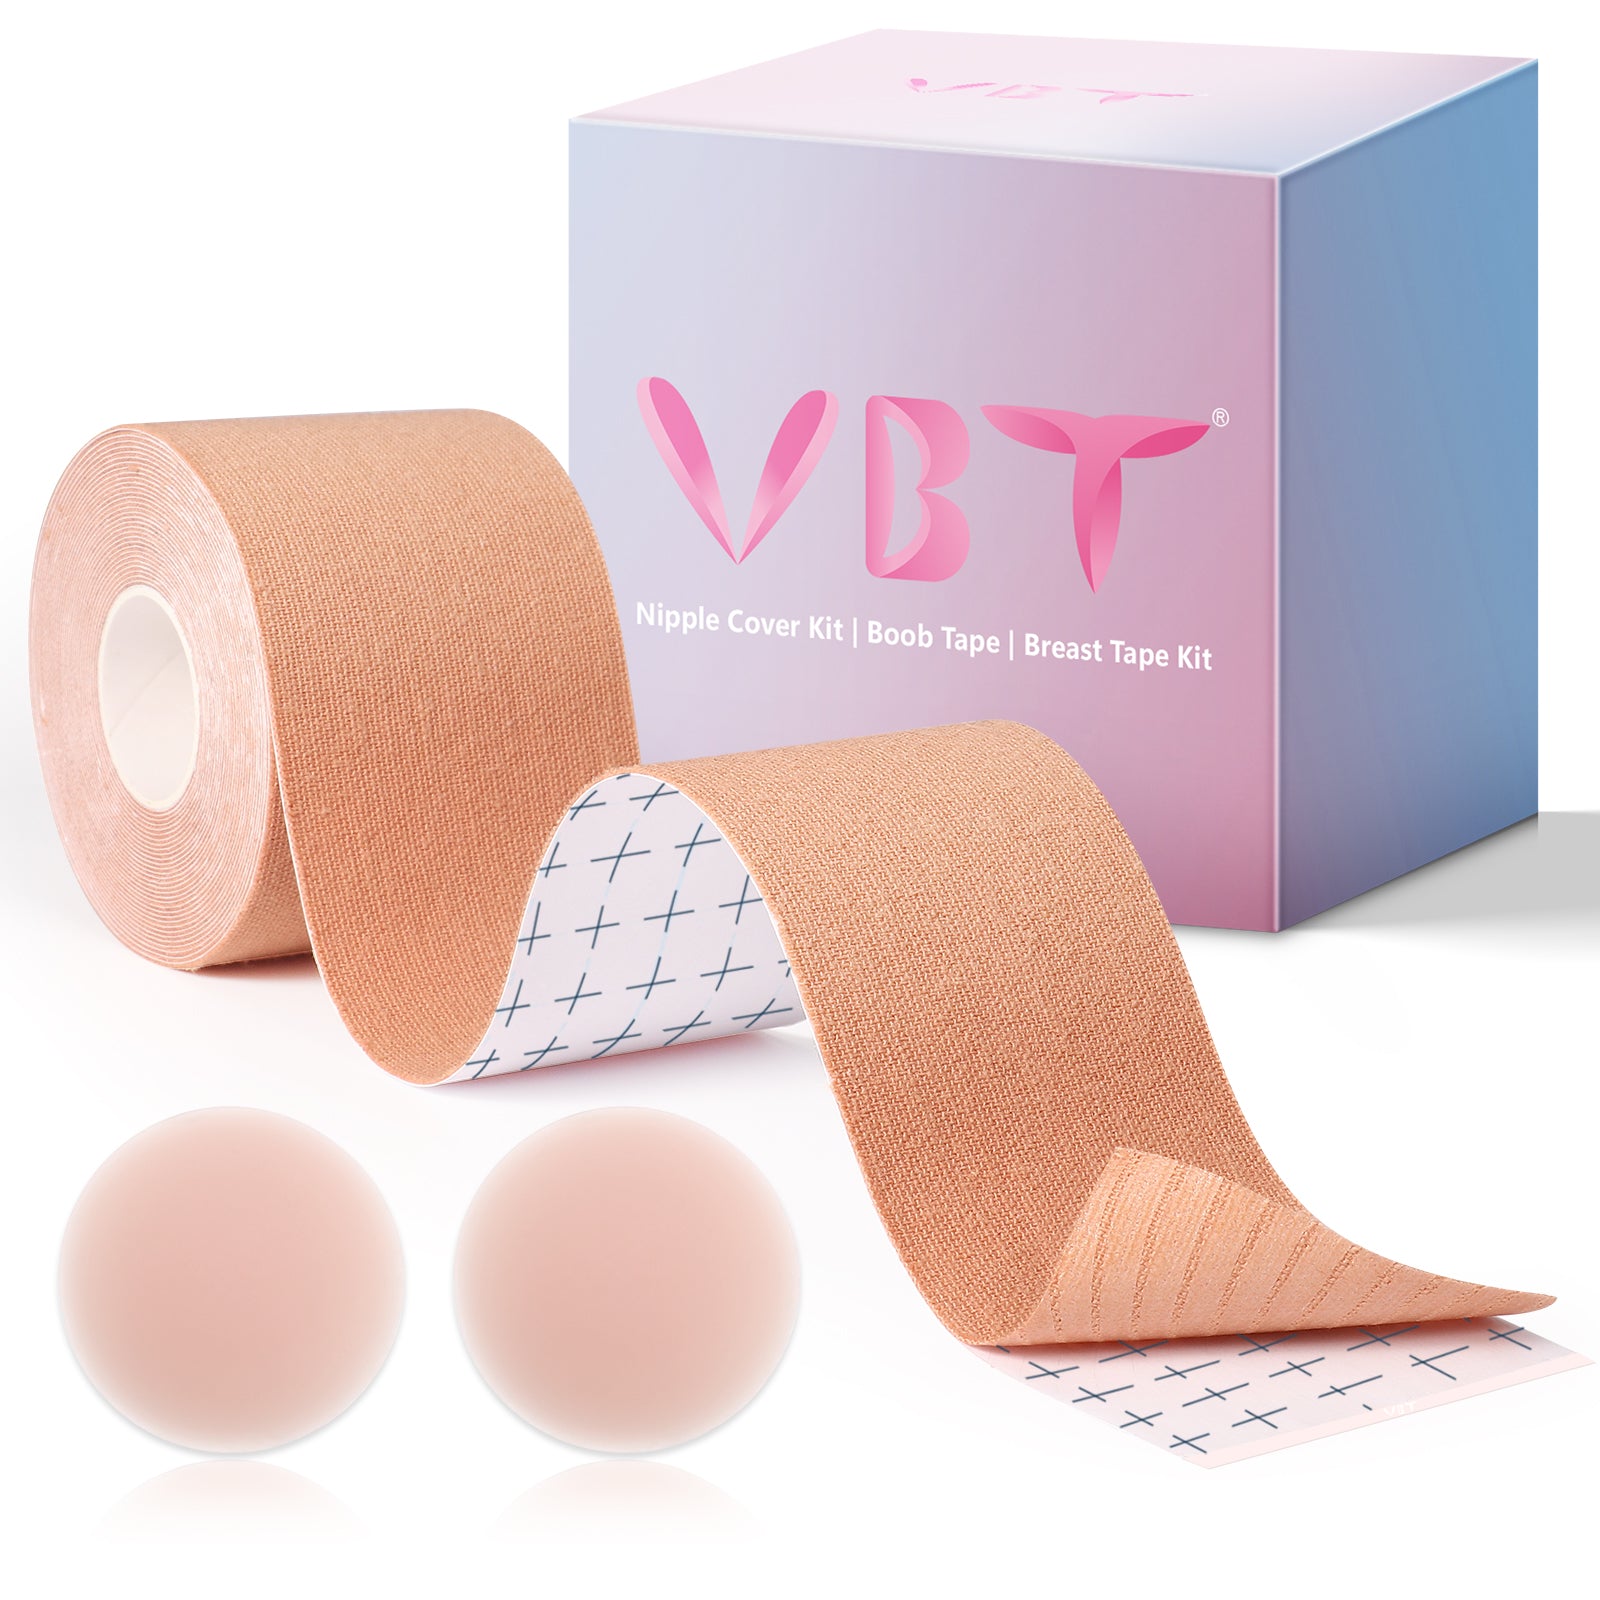 VBT Beige Boob Tape Set- Breast Lift Tape & Nipple Covers, A-G Cup